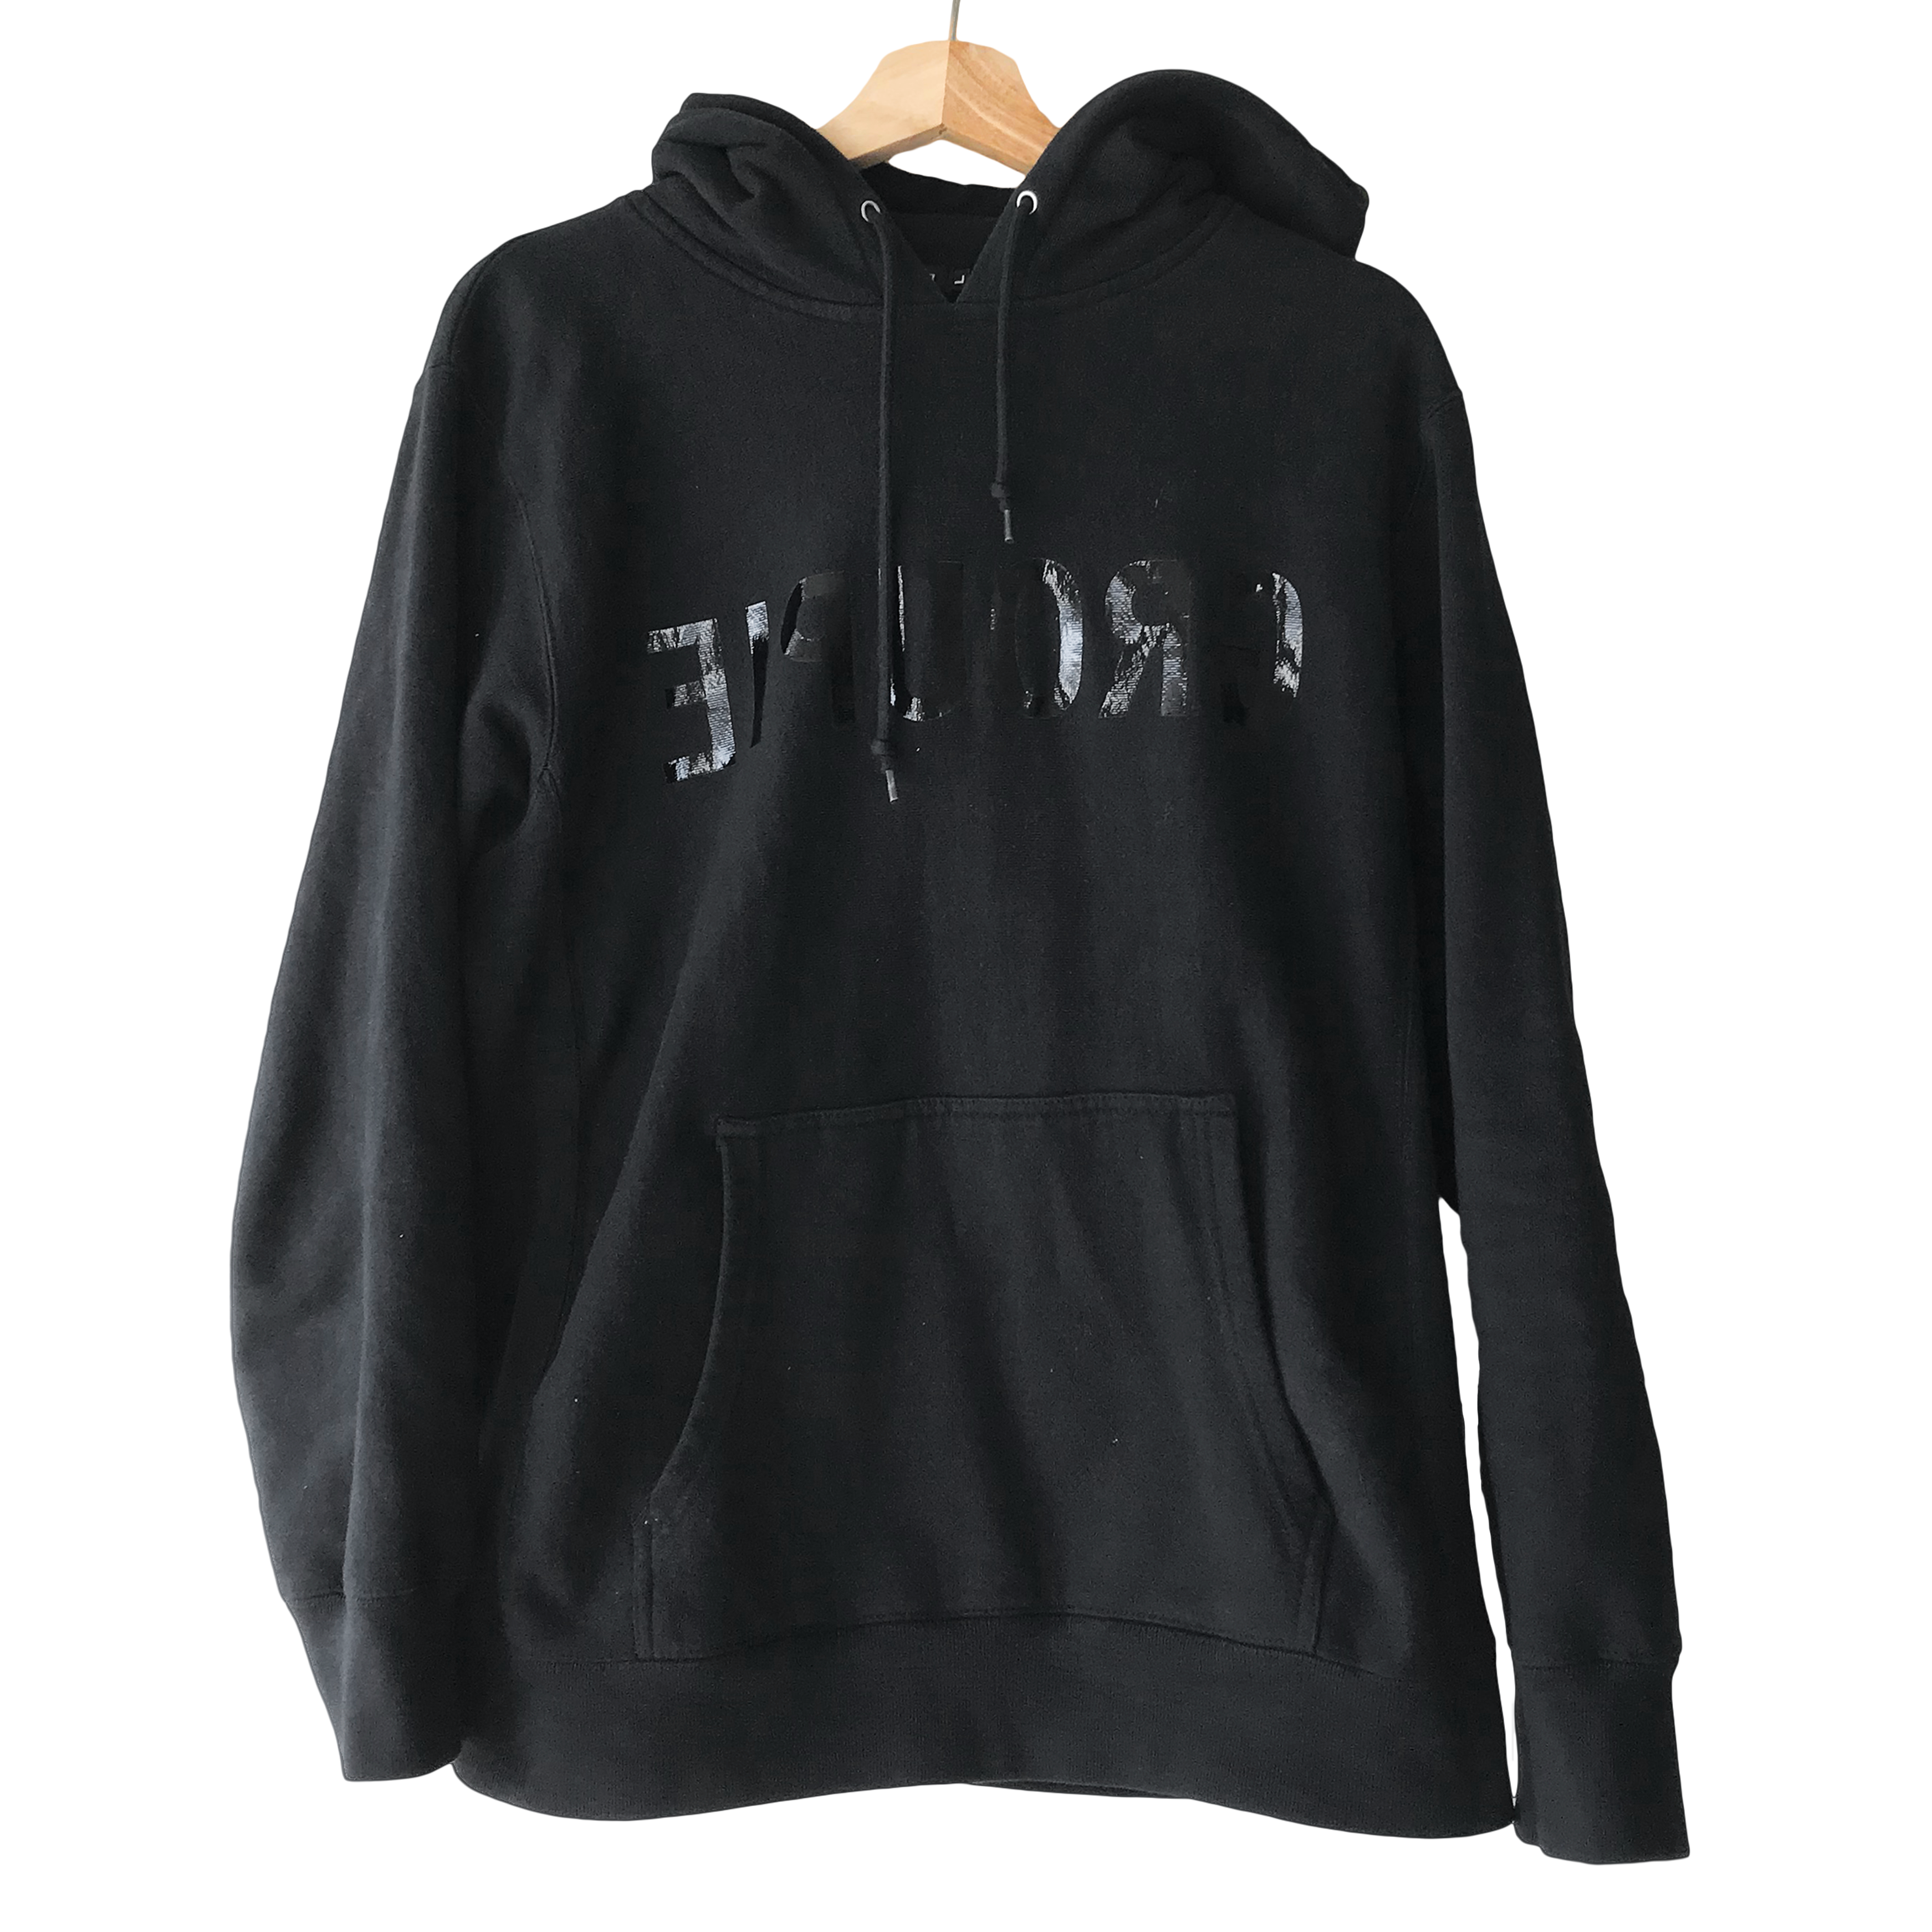 Undercover Black “Groupie” Hoodie - SS99 “Relief” - SILVER LEAGUE